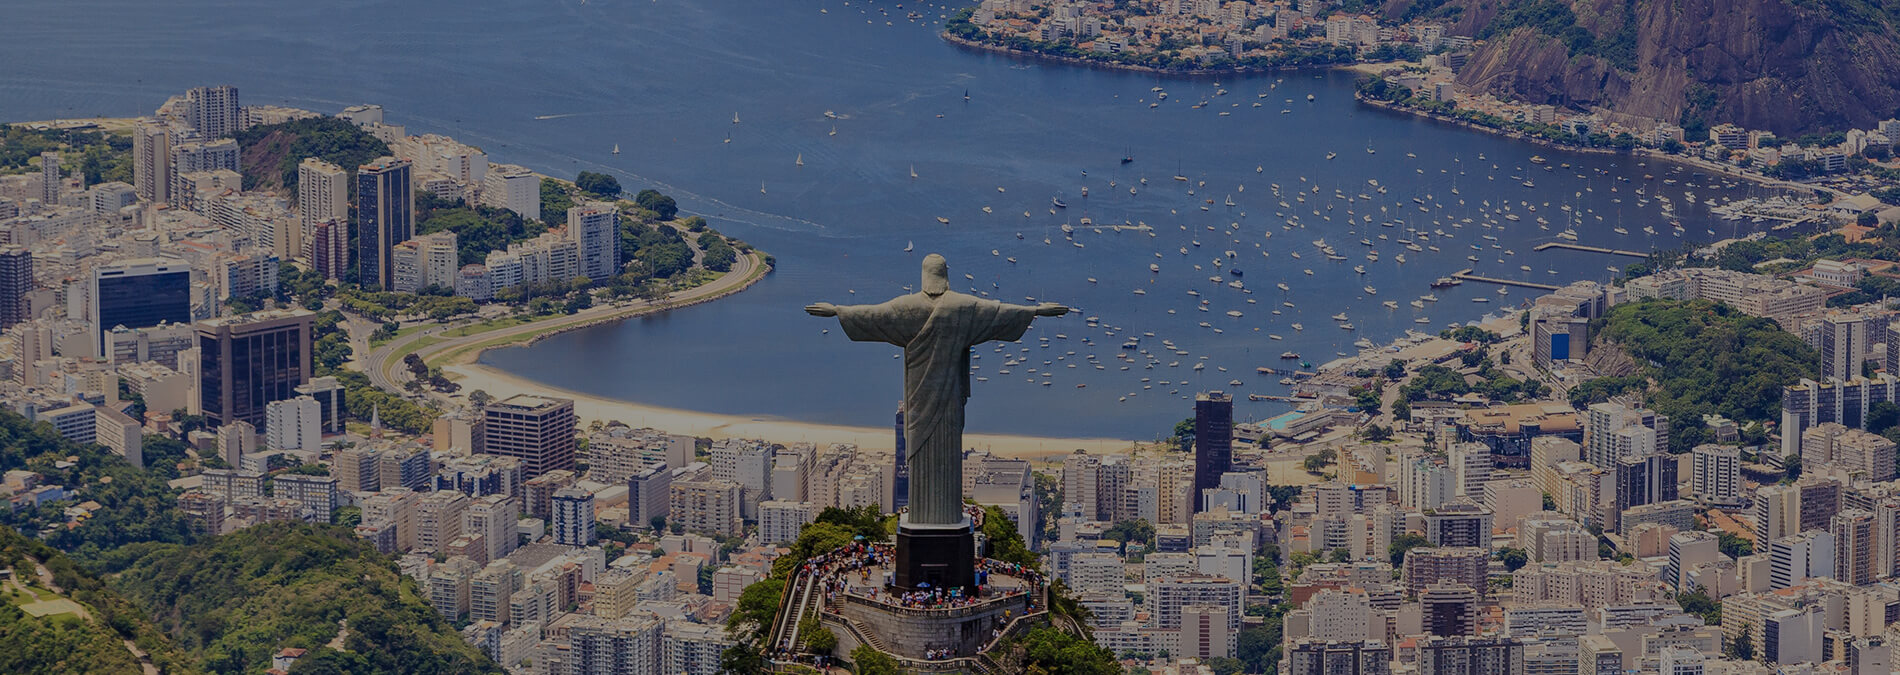 aerial view of Christ the redeemer